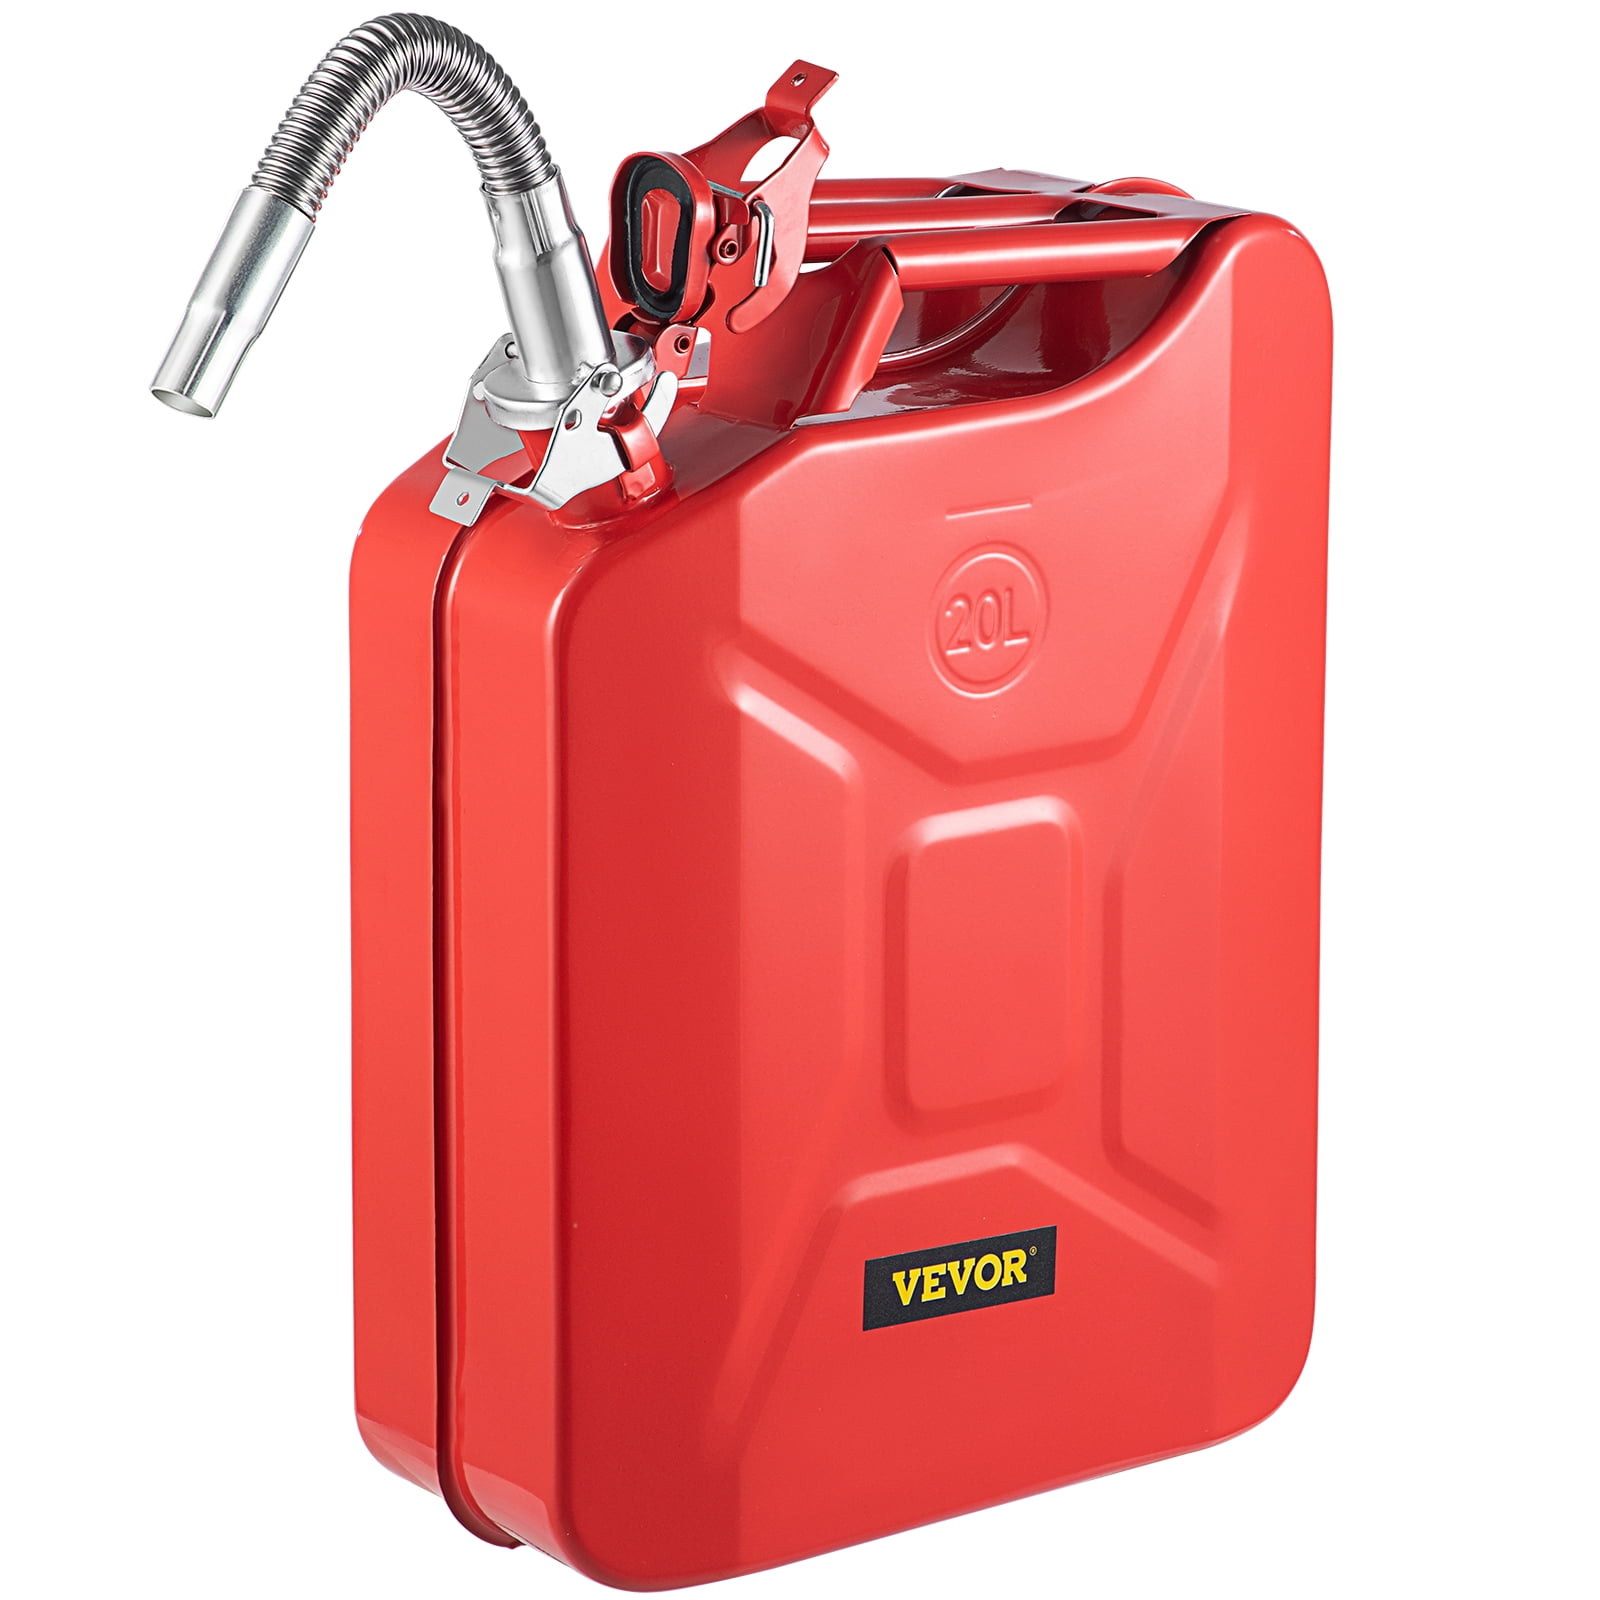 VEVOR Jerry Fuel Can, 5.3 Gallon / 20 L Portable Jerry Gas Can with  Flexible Spout System, Rustproof ＆ Heat-resistant Steel Fuel Tank for Cars  Trucks Equipment, Yellow